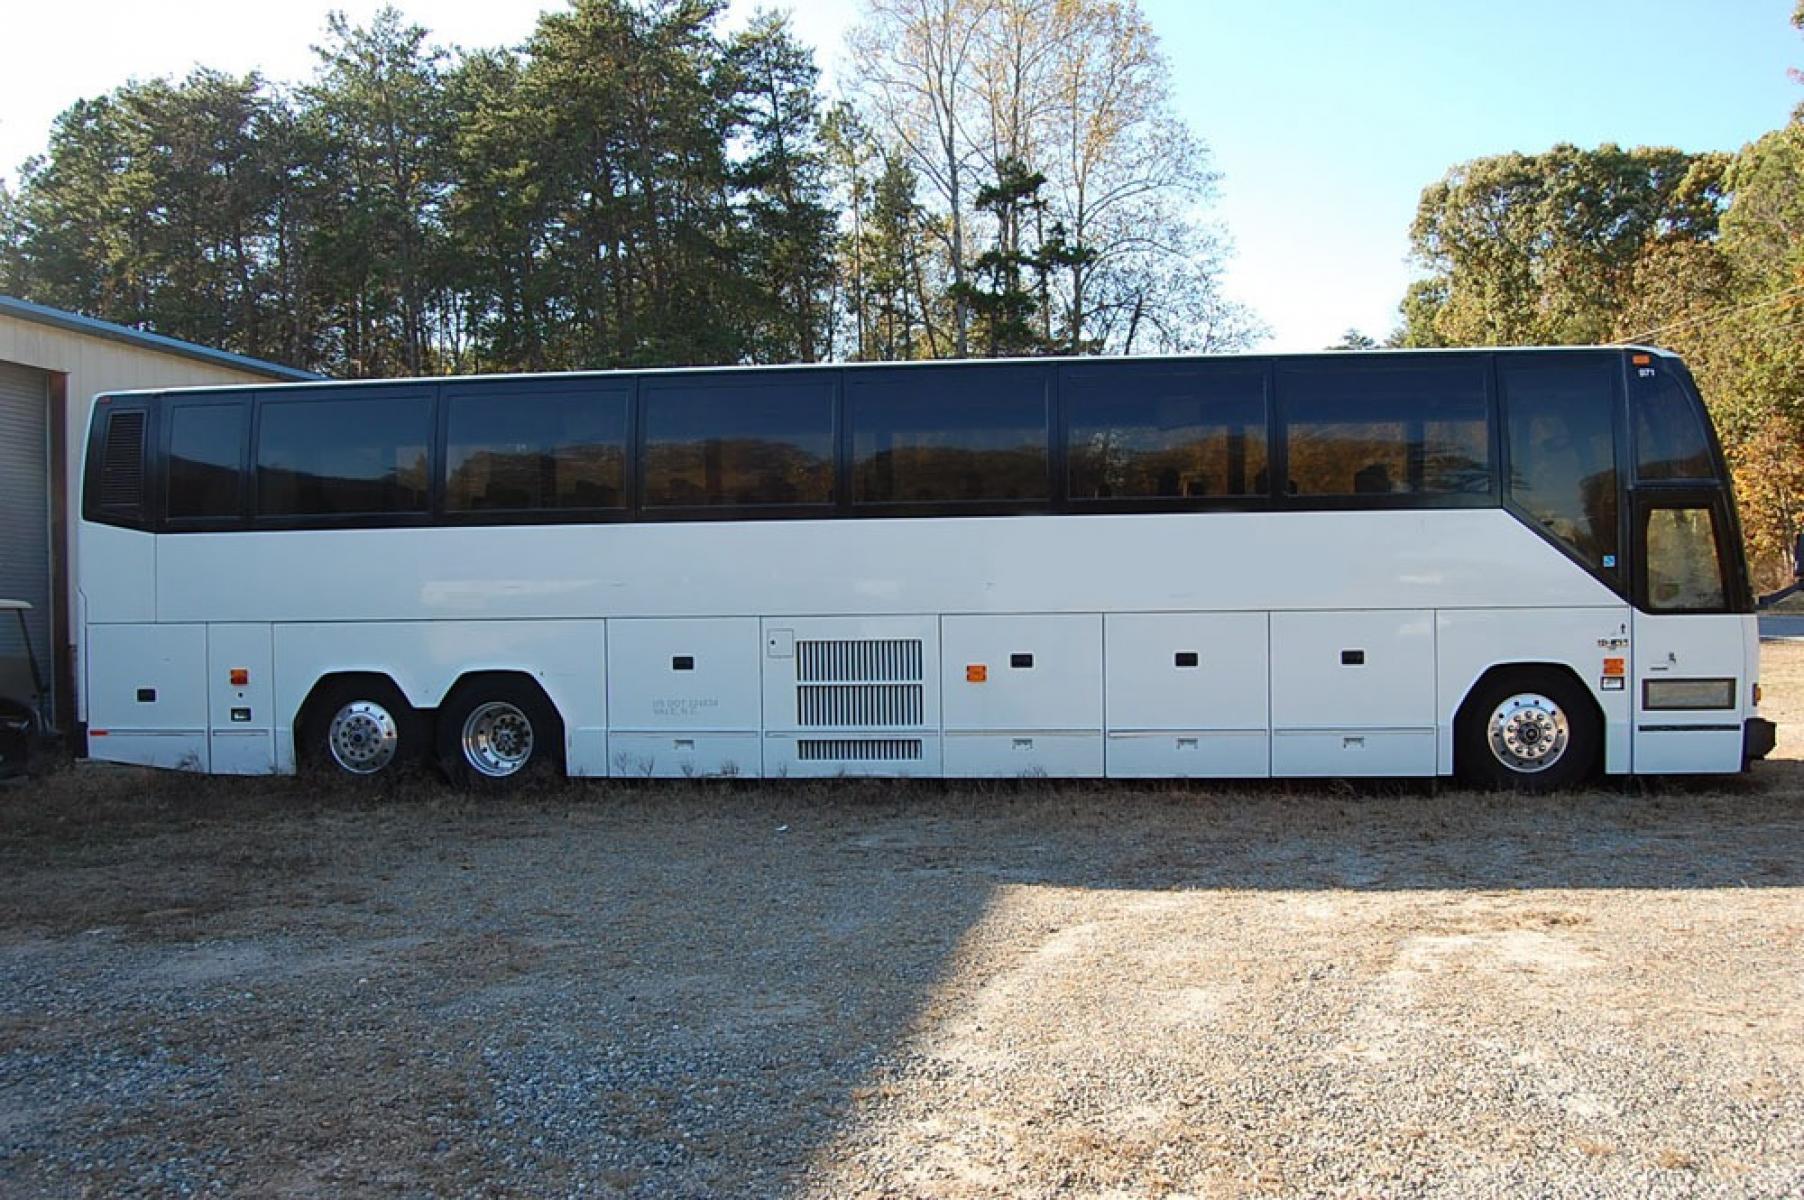 1997 Prevost HS-45 with an Detroit Diesel Series 60 engine, Allison transmission, 0.000000, 0.000000 - 1997 Prevost H3-45 - Series 60 Detroit Diesel - Allison Automatic Transmission - 45' - Alloy Wheels - 56 Passengers - Open Parcel Racks - 3 Monitors and DVD – Restroom - Photo #1